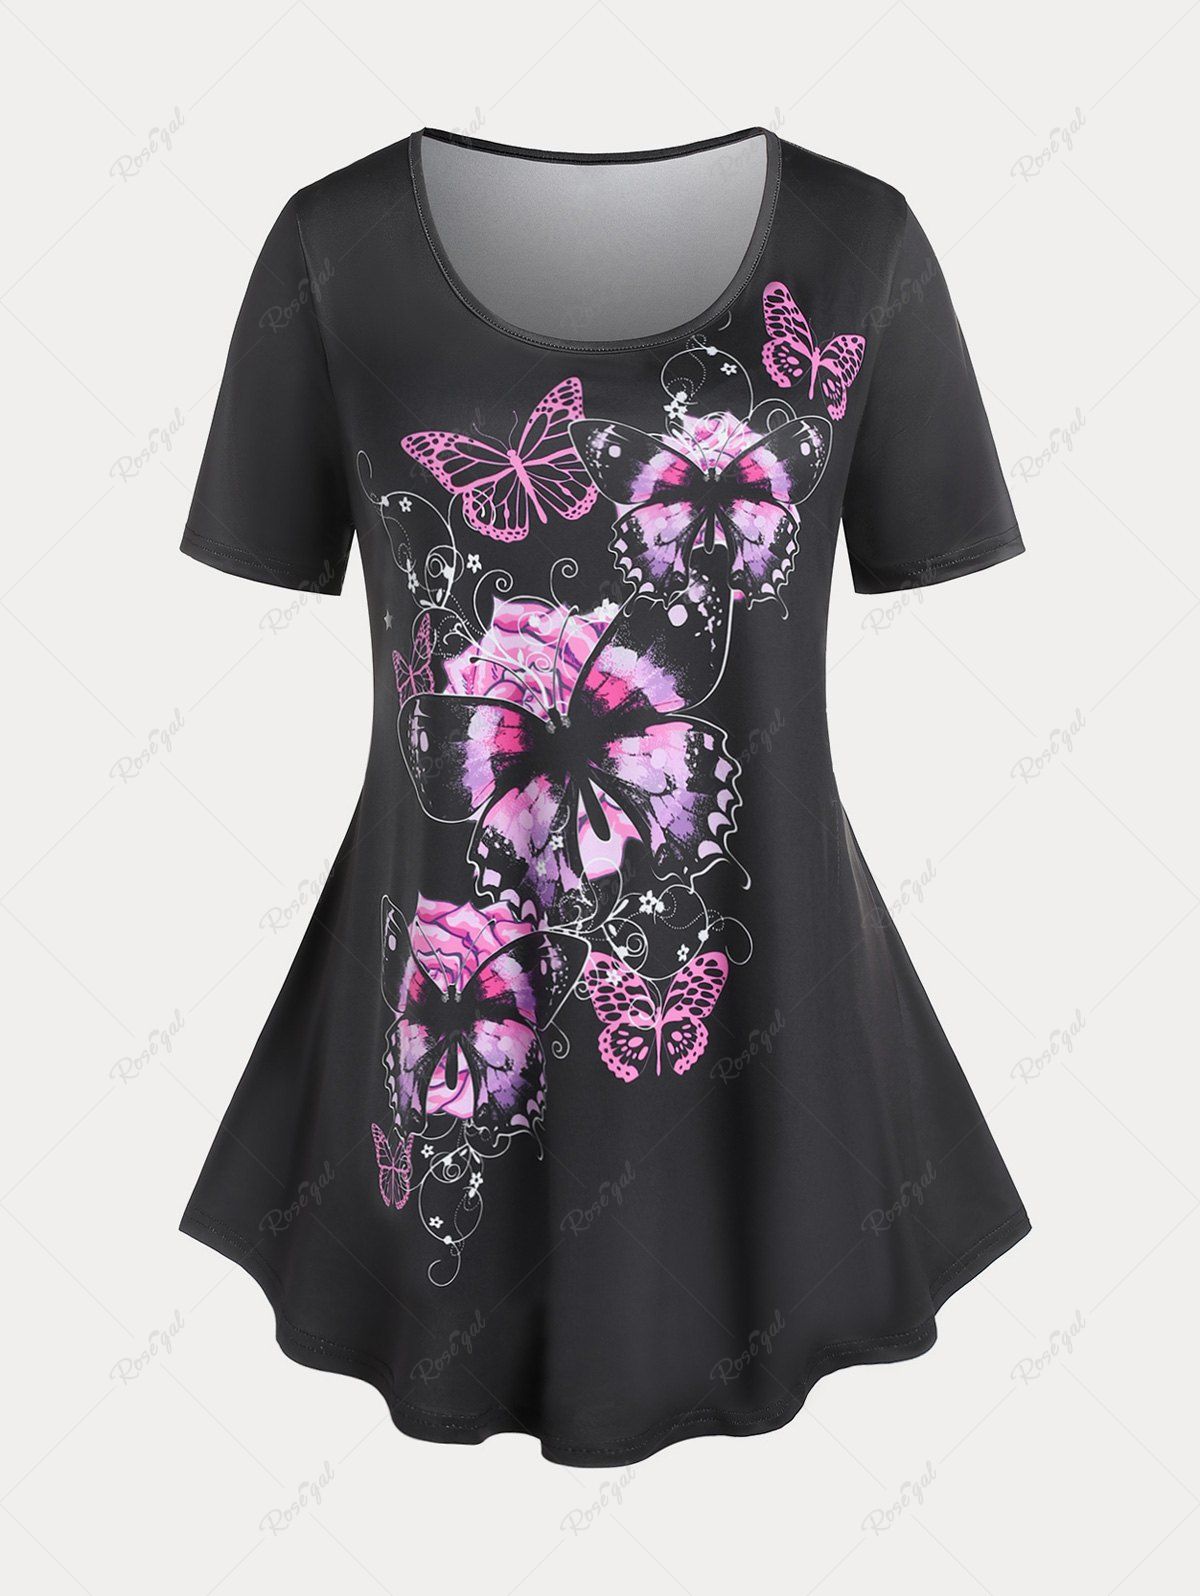 Hot Floral Butterfly Print Plus Size Tunic T-shirt  